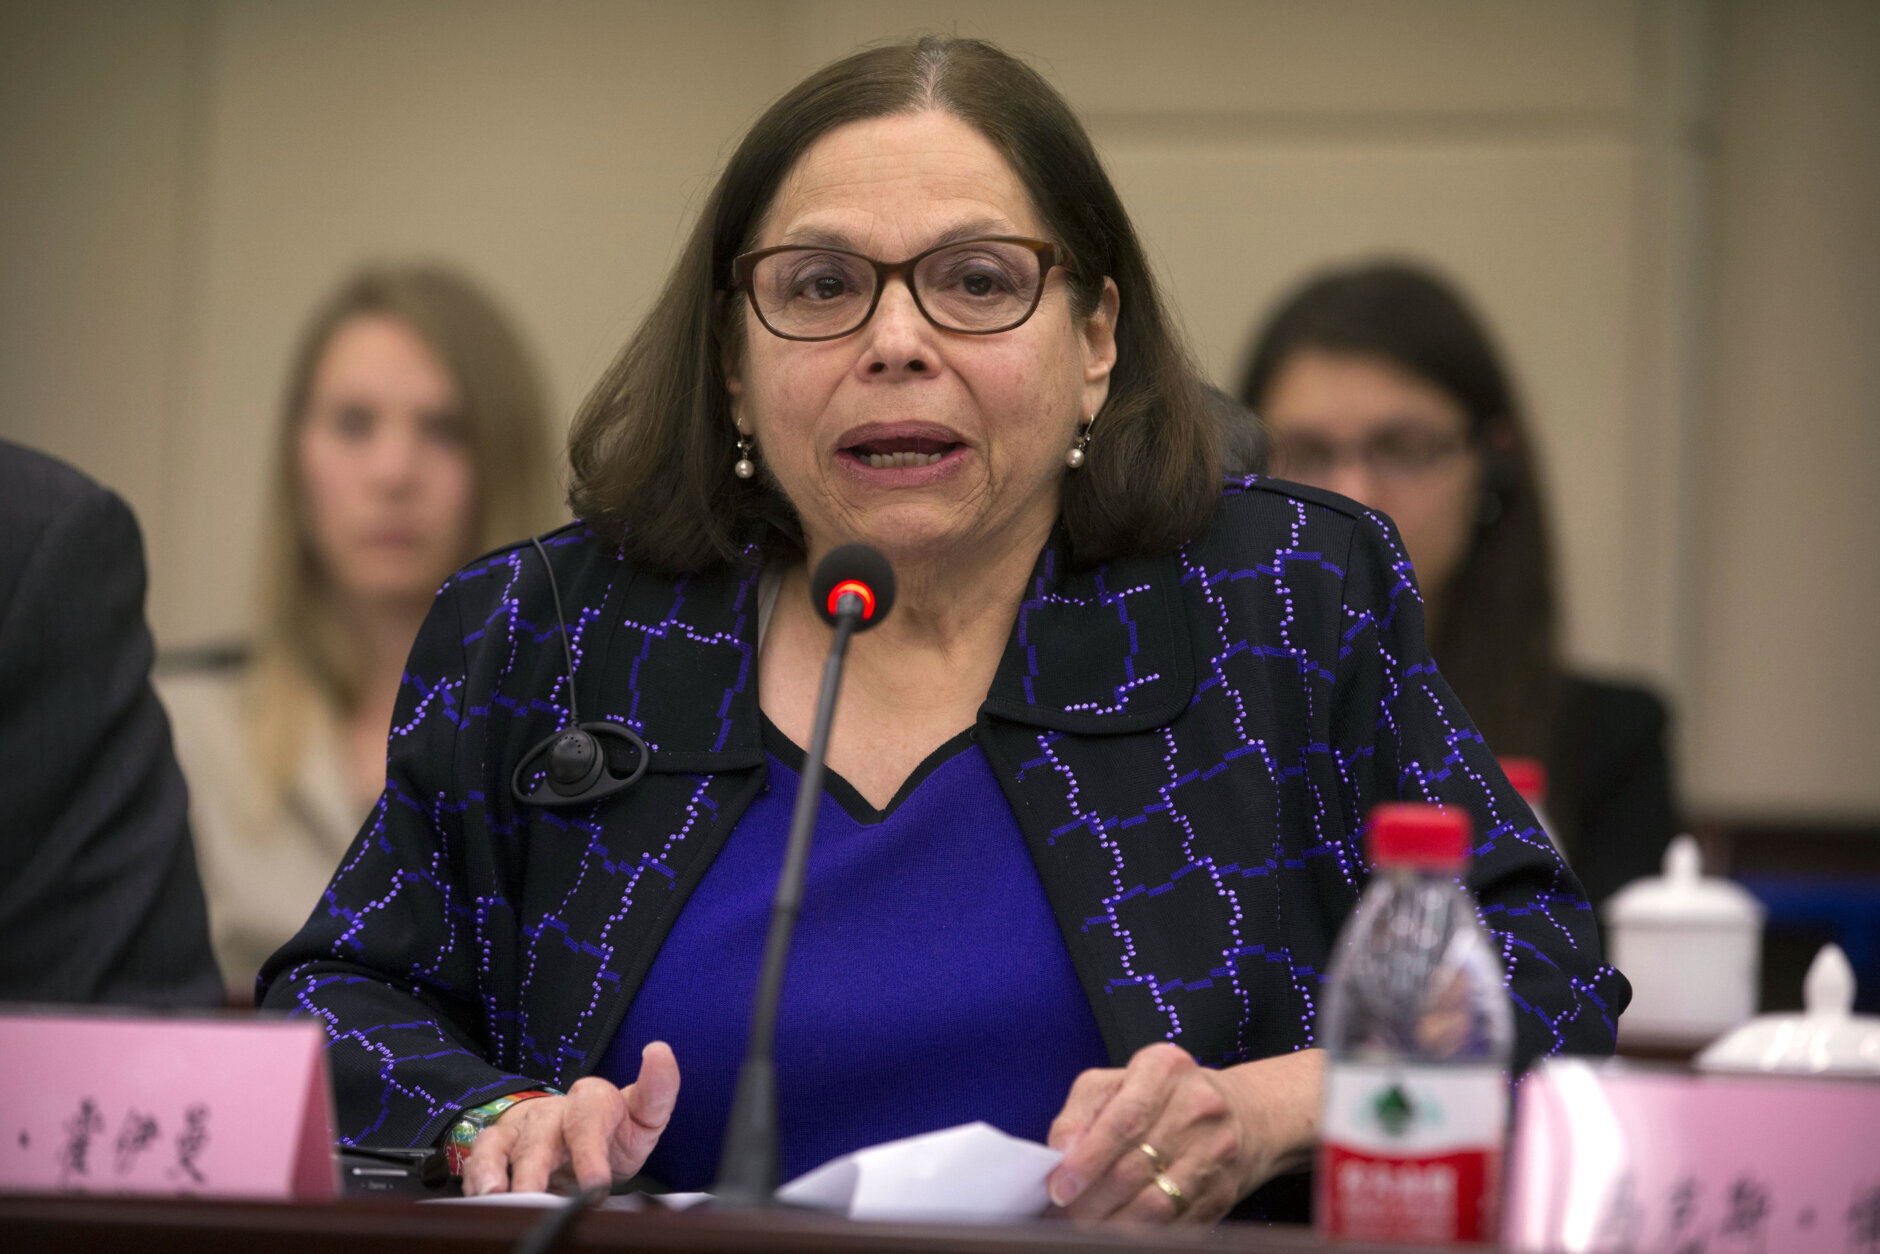 Judith Heumann, special advisor for International Disability Rights at the U.S. Department of State, speaks at the opening session of the China-U.S. Coordination Meeting on Disability in Beijing, Tuesday, April 12, 2016. (AP Photo/Mark Schiefelbein, Pool)